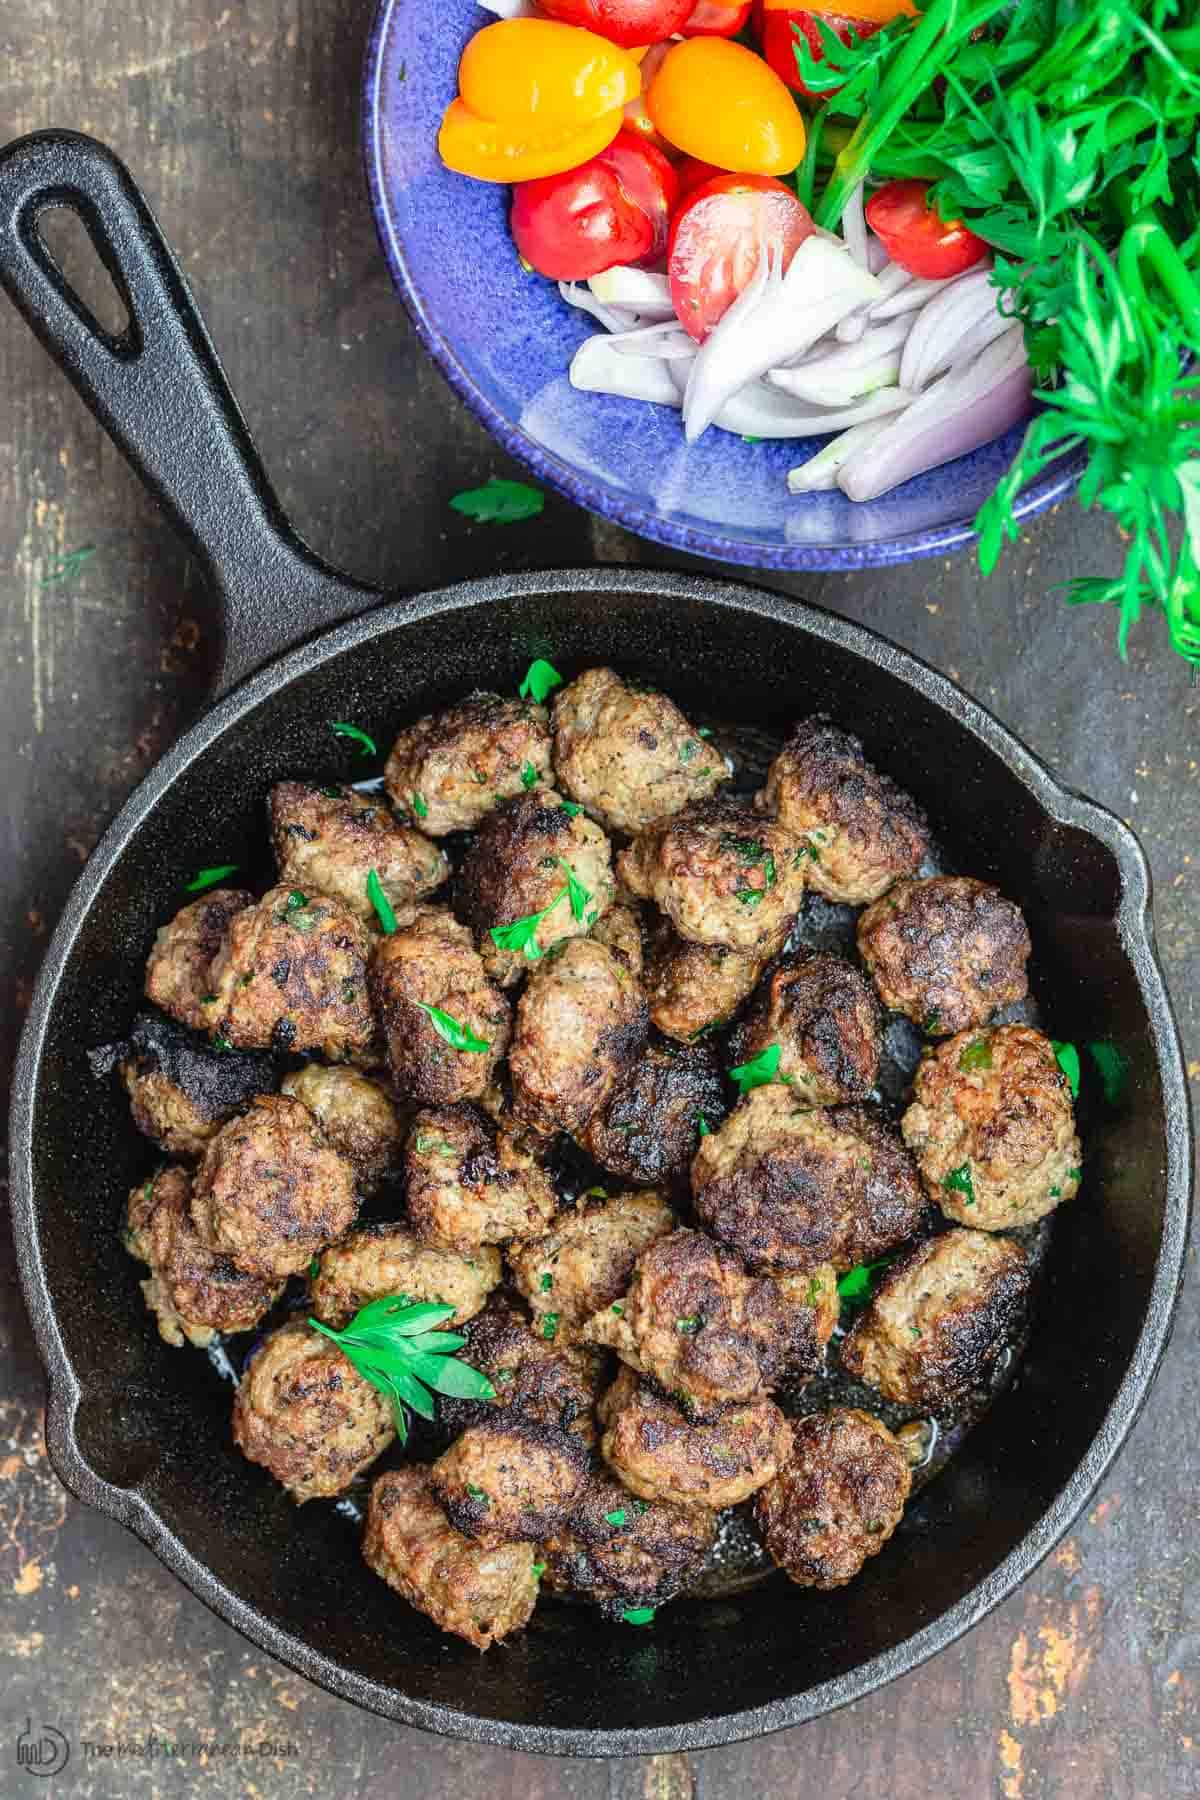 Moroccan Meatballs with a Side of Sliced Cherry Tomatoes, Onions, Fresh Herbs